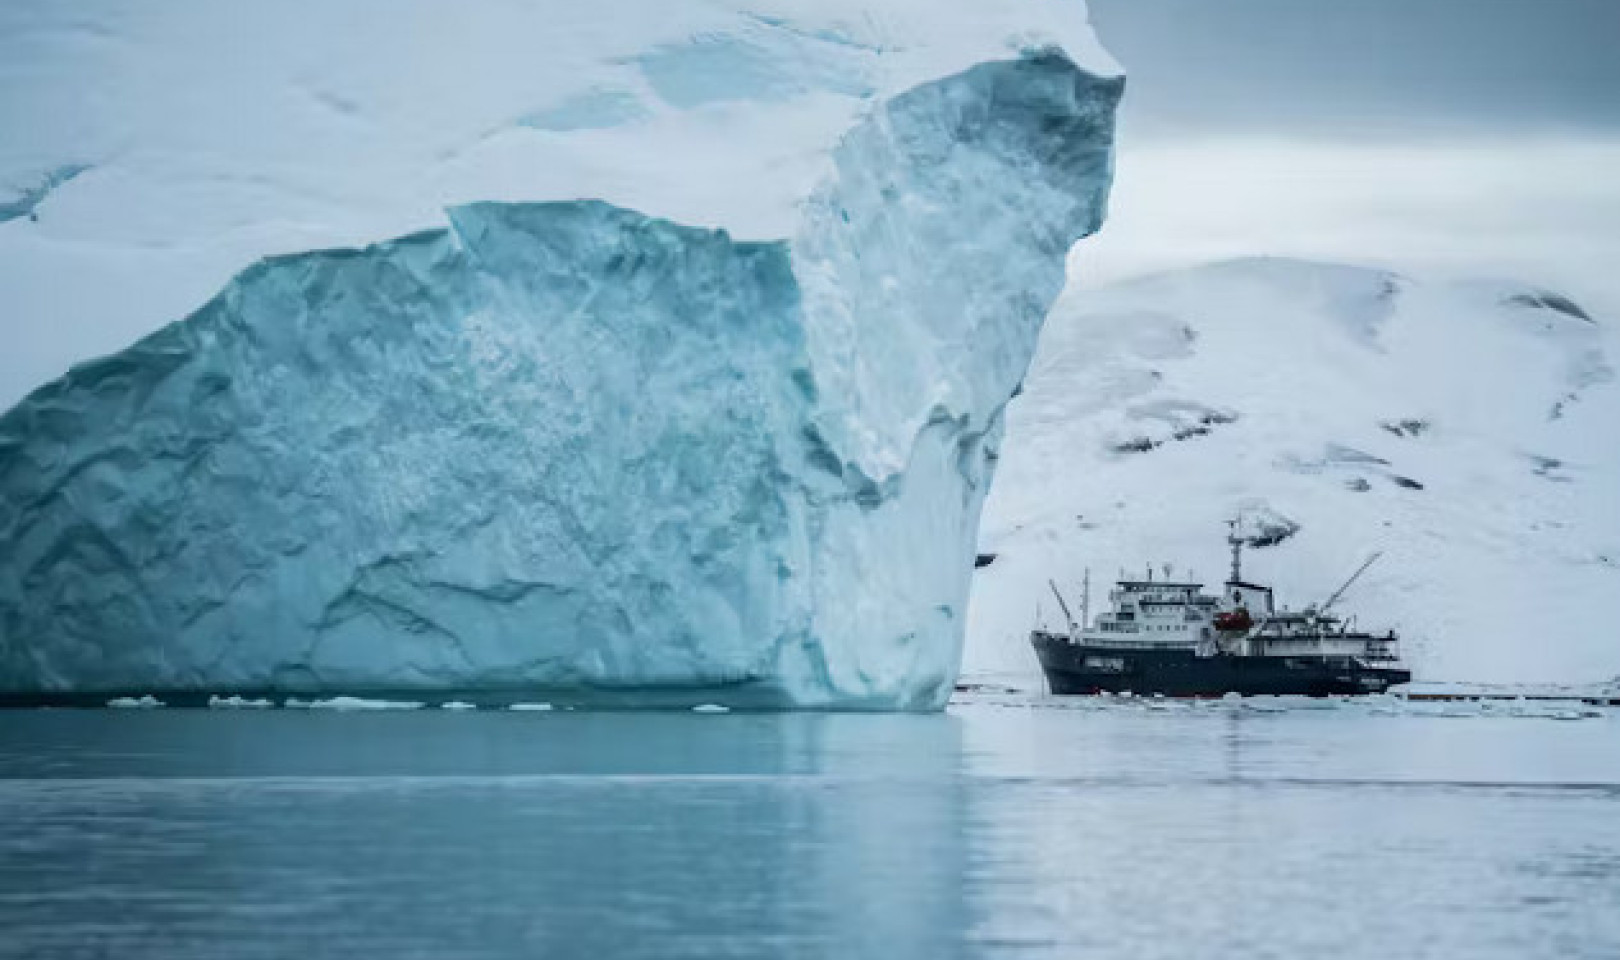 Do Our Oceans Face an Icy Shutdown? Greenland's Melting Secrets Revealed